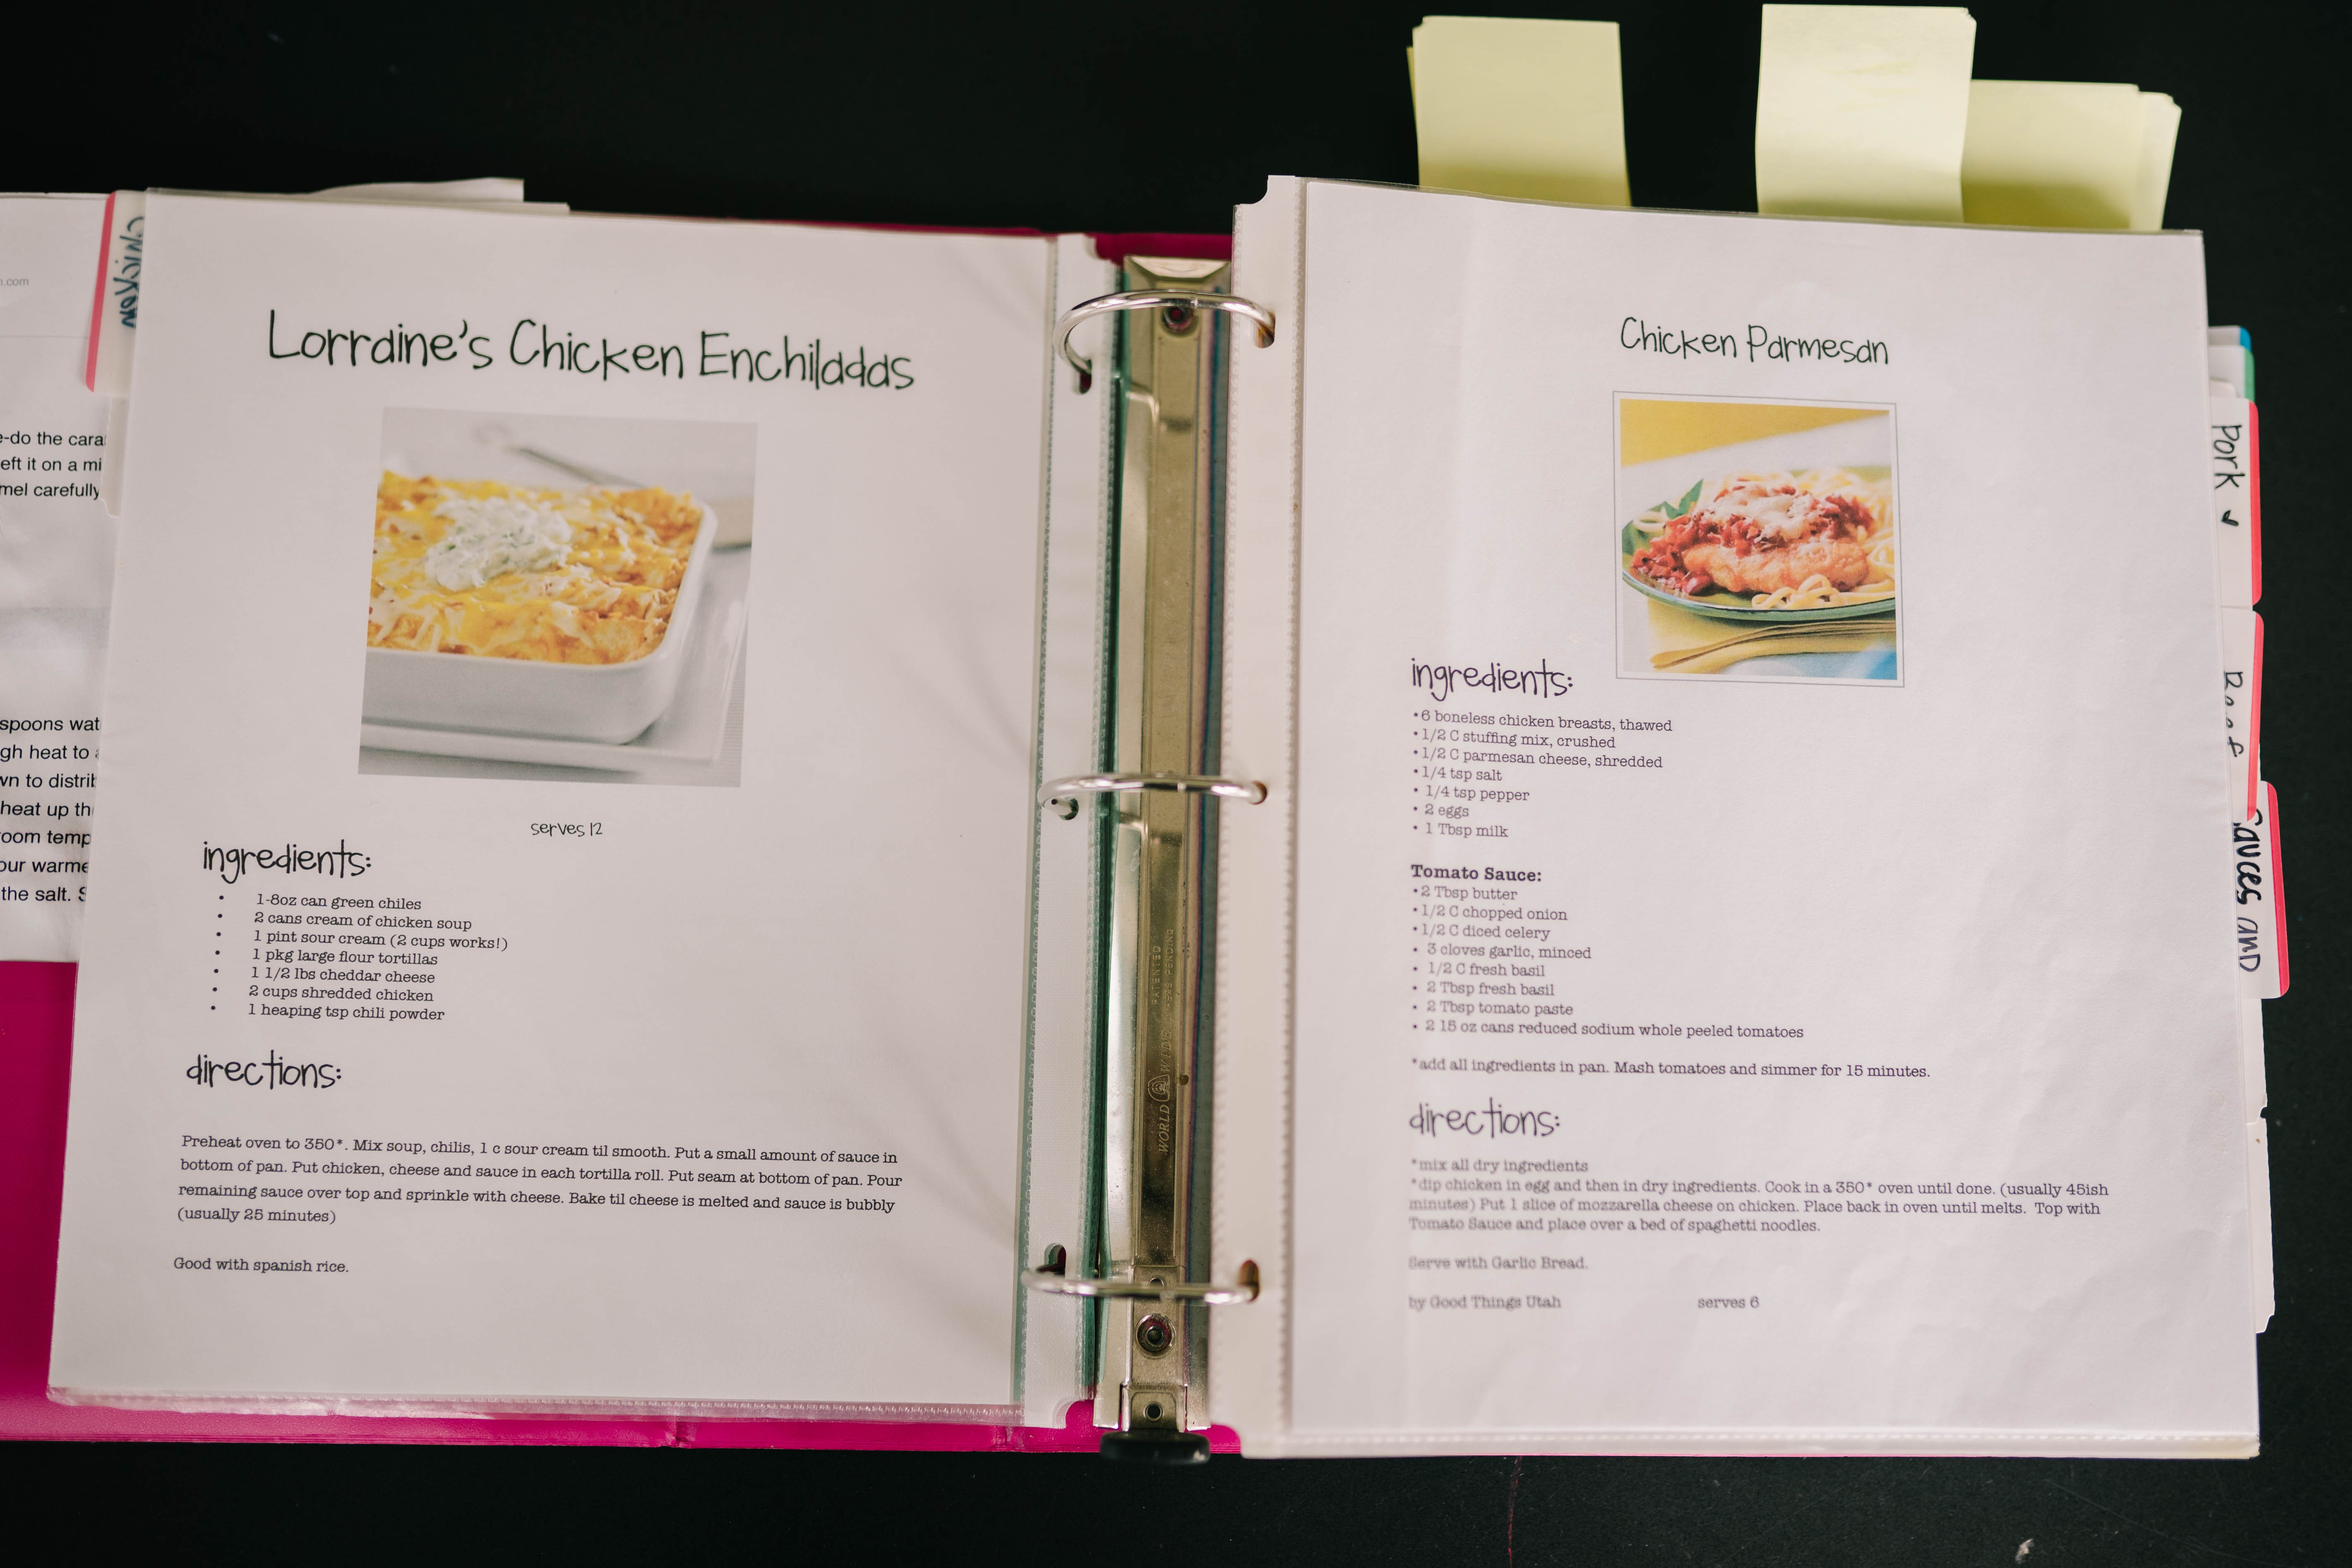 The 1 Best Way To Make Your Own Recipe Book